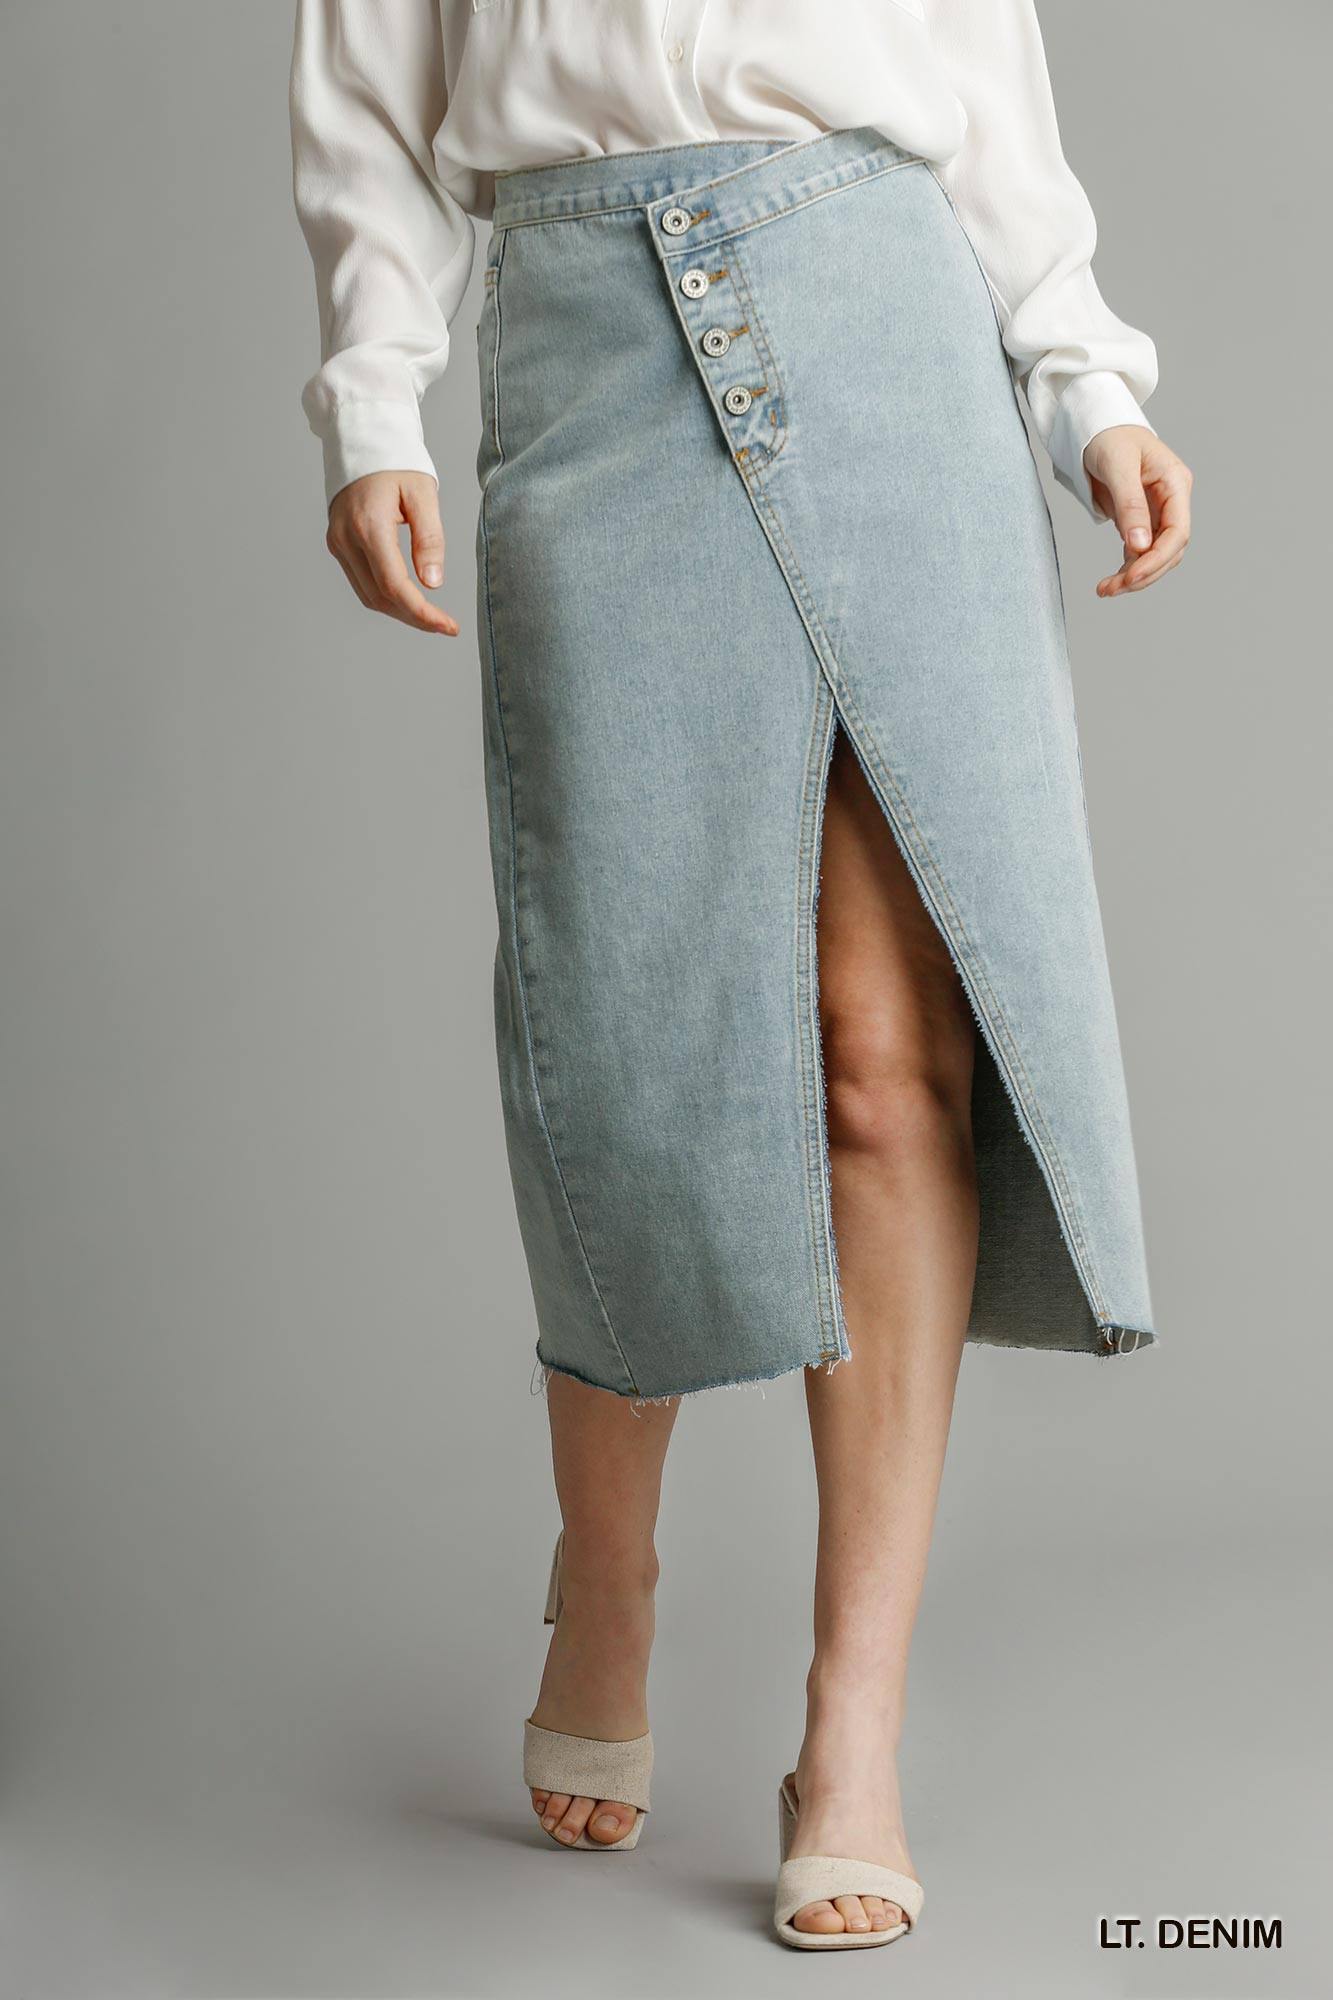 Asymmetrical Waist And Button Up Front Split Denim Skirt With Back Pockets And Unfinished Hem - Pearlara